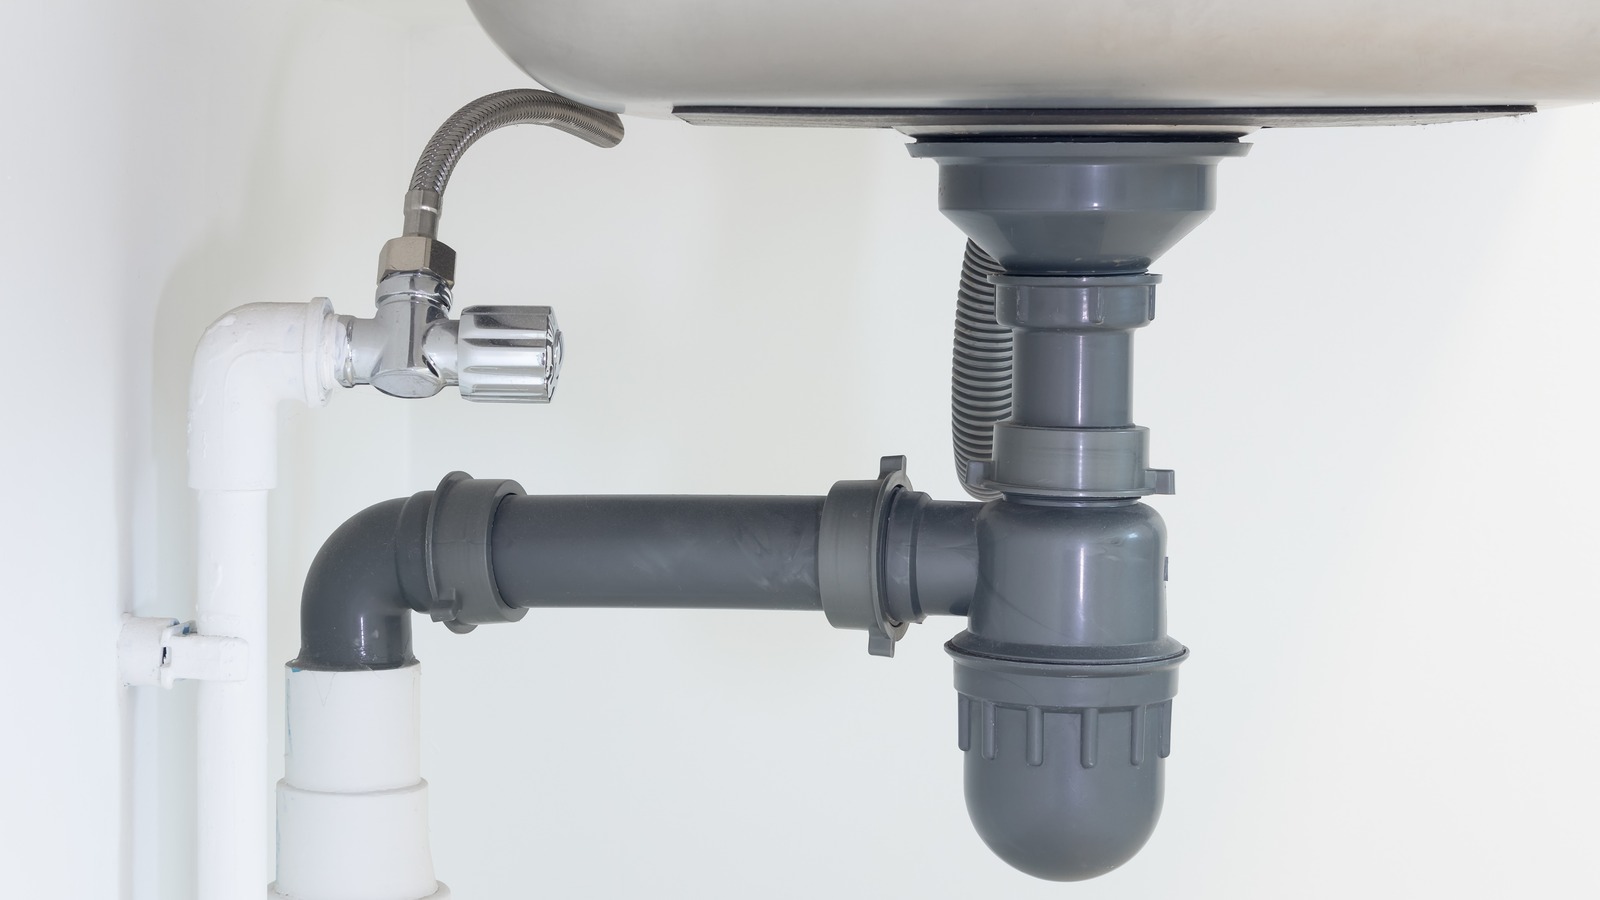 kitchen sink isn't draining unless vent is off